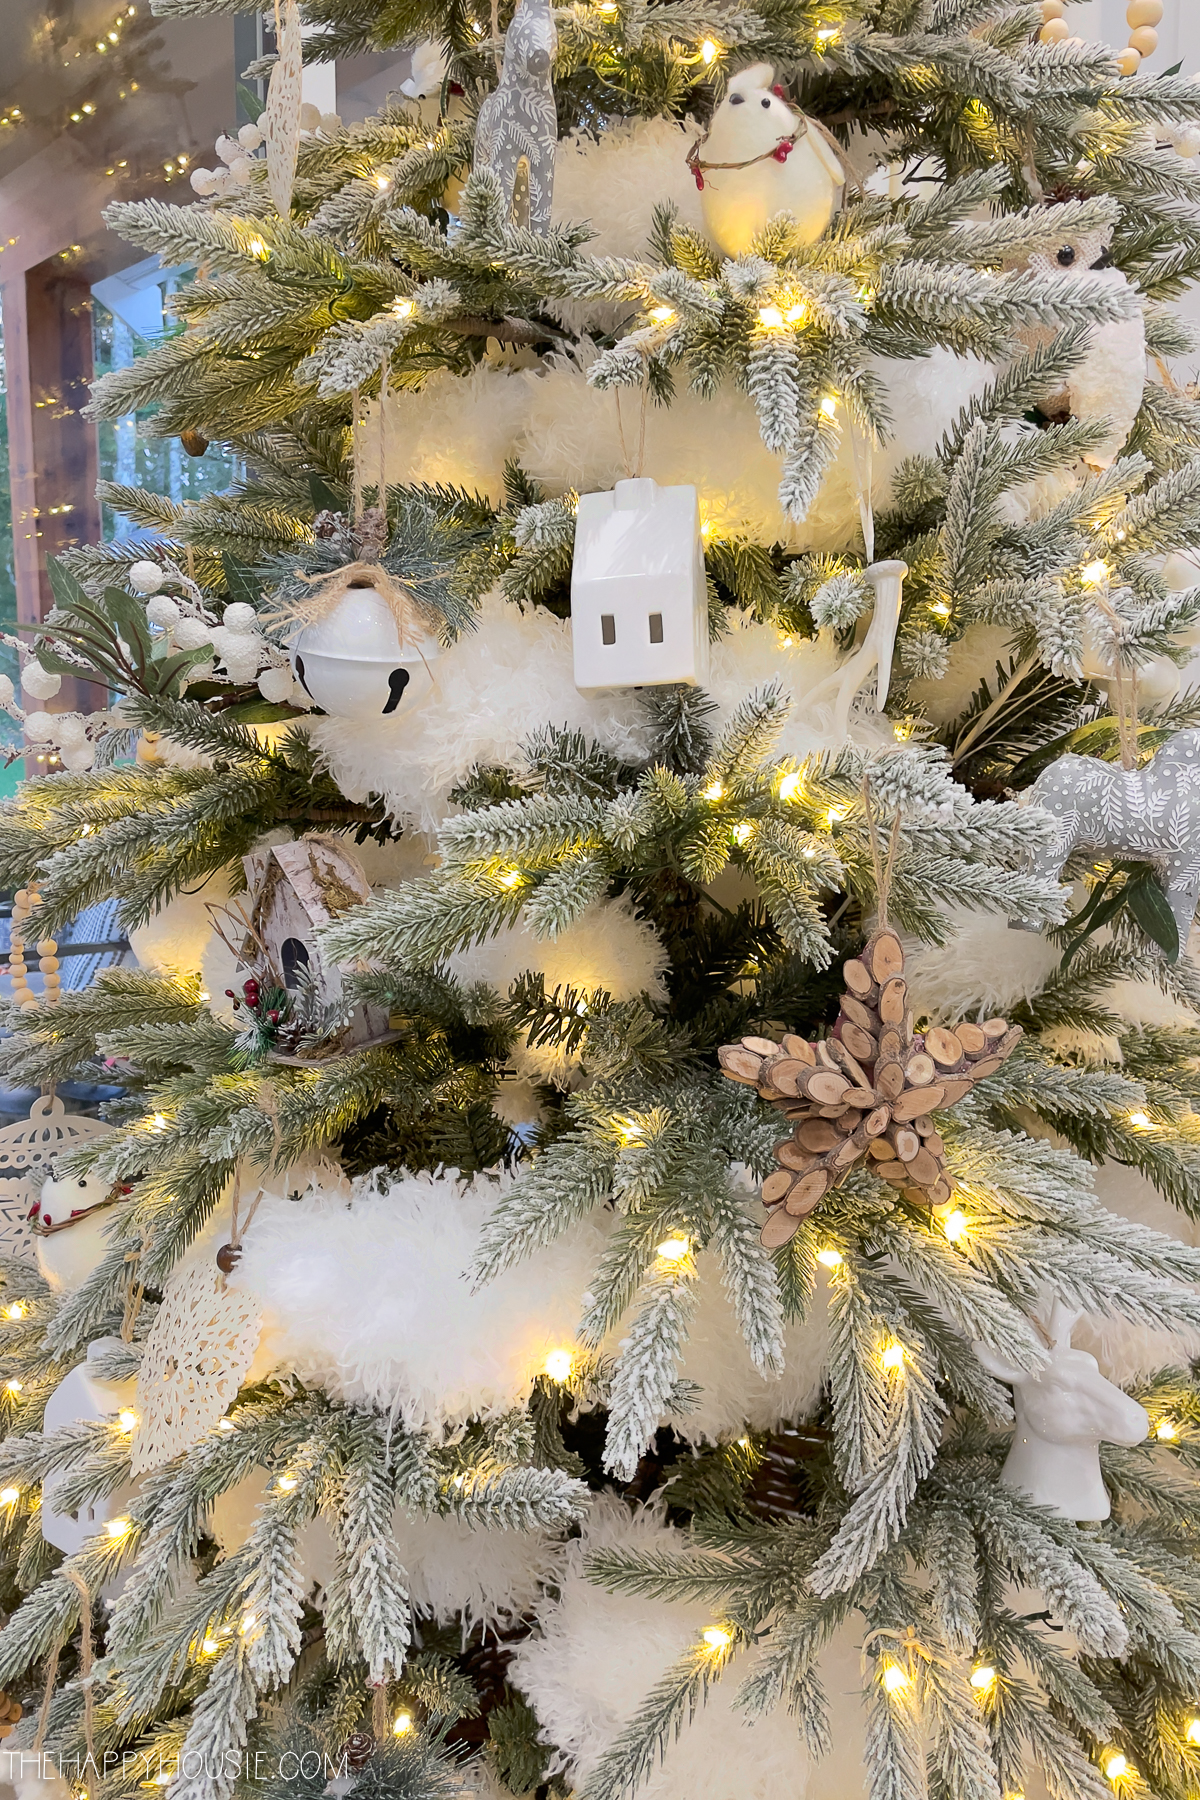 White lights on the tree.